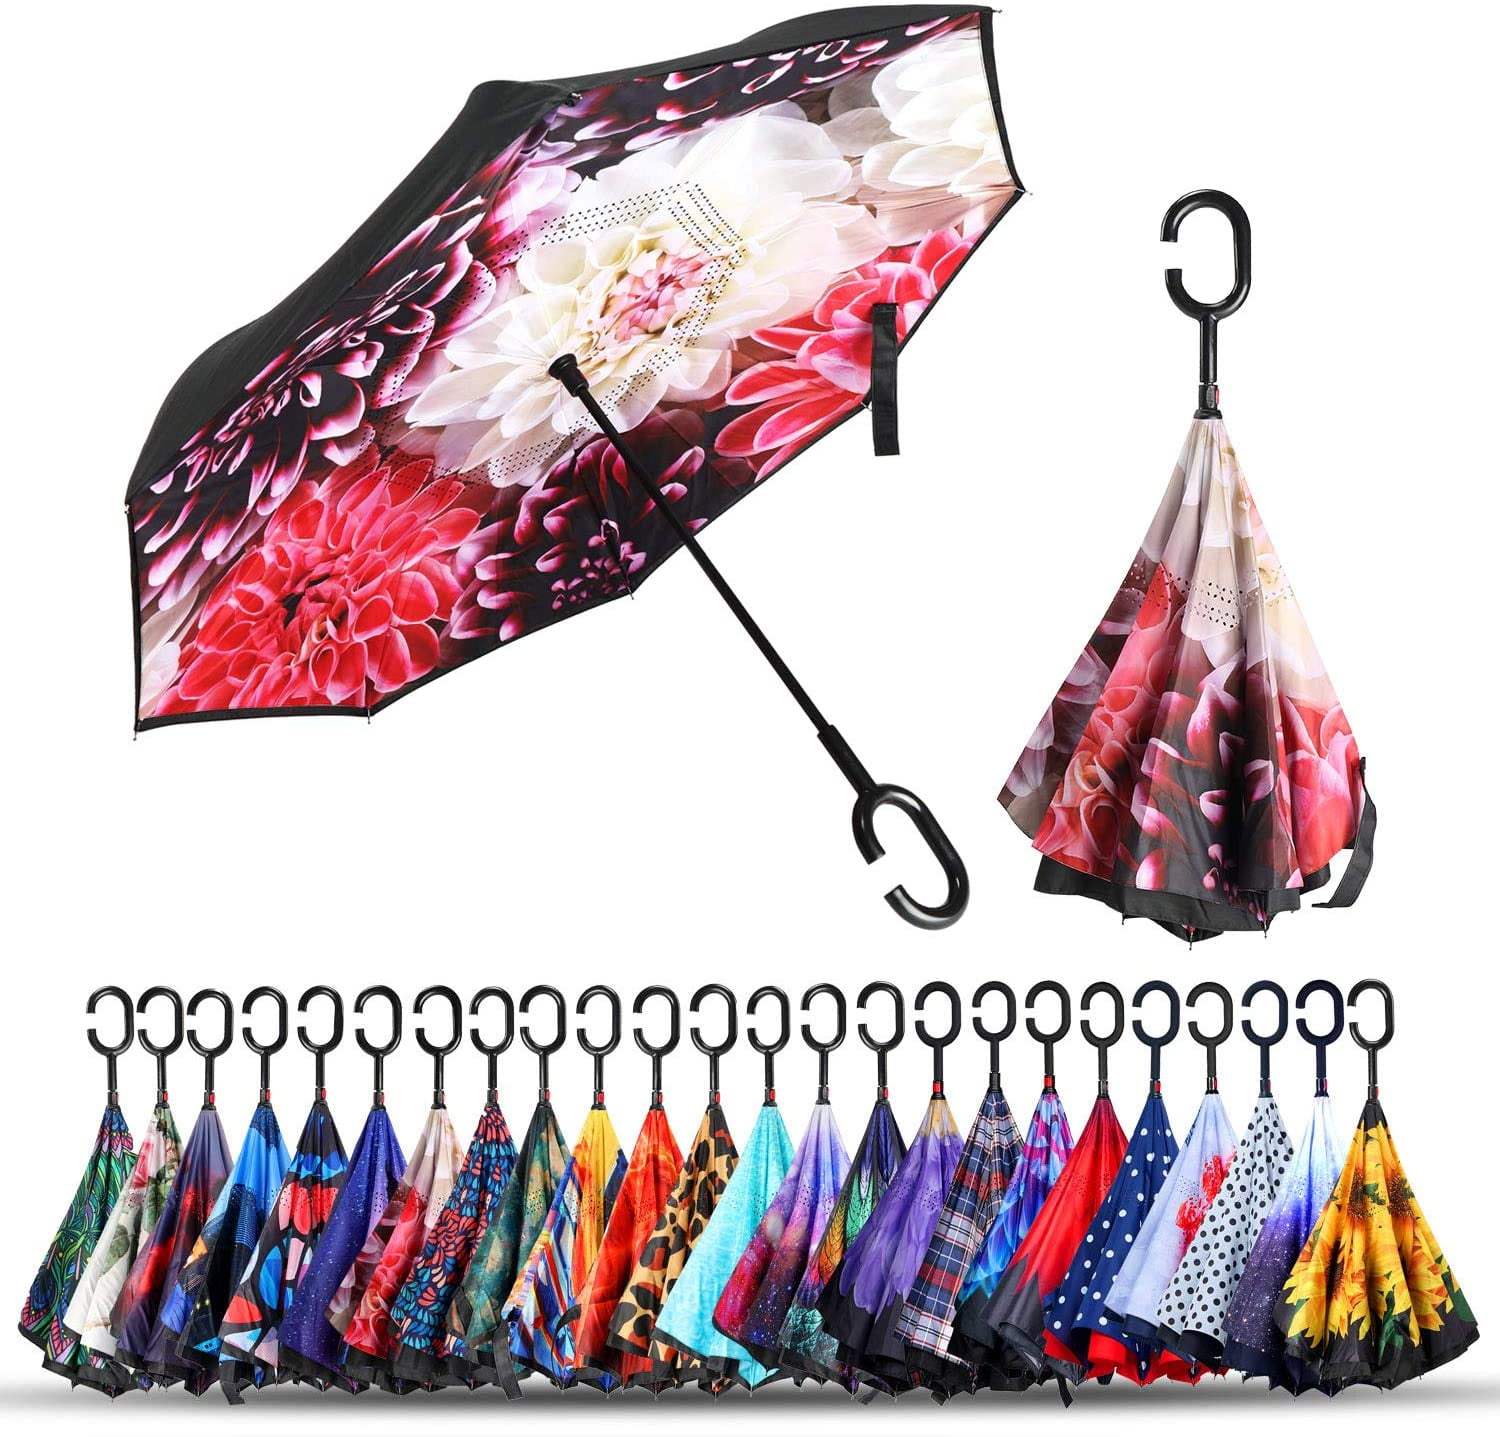 Double Layer Inverted Umbrellas Reverse Folding Umbrella Windproof UV Protection Big Straight Umbrella Inside Out Upside Down for Car Rain Outdoor With C-Shaped Handle 